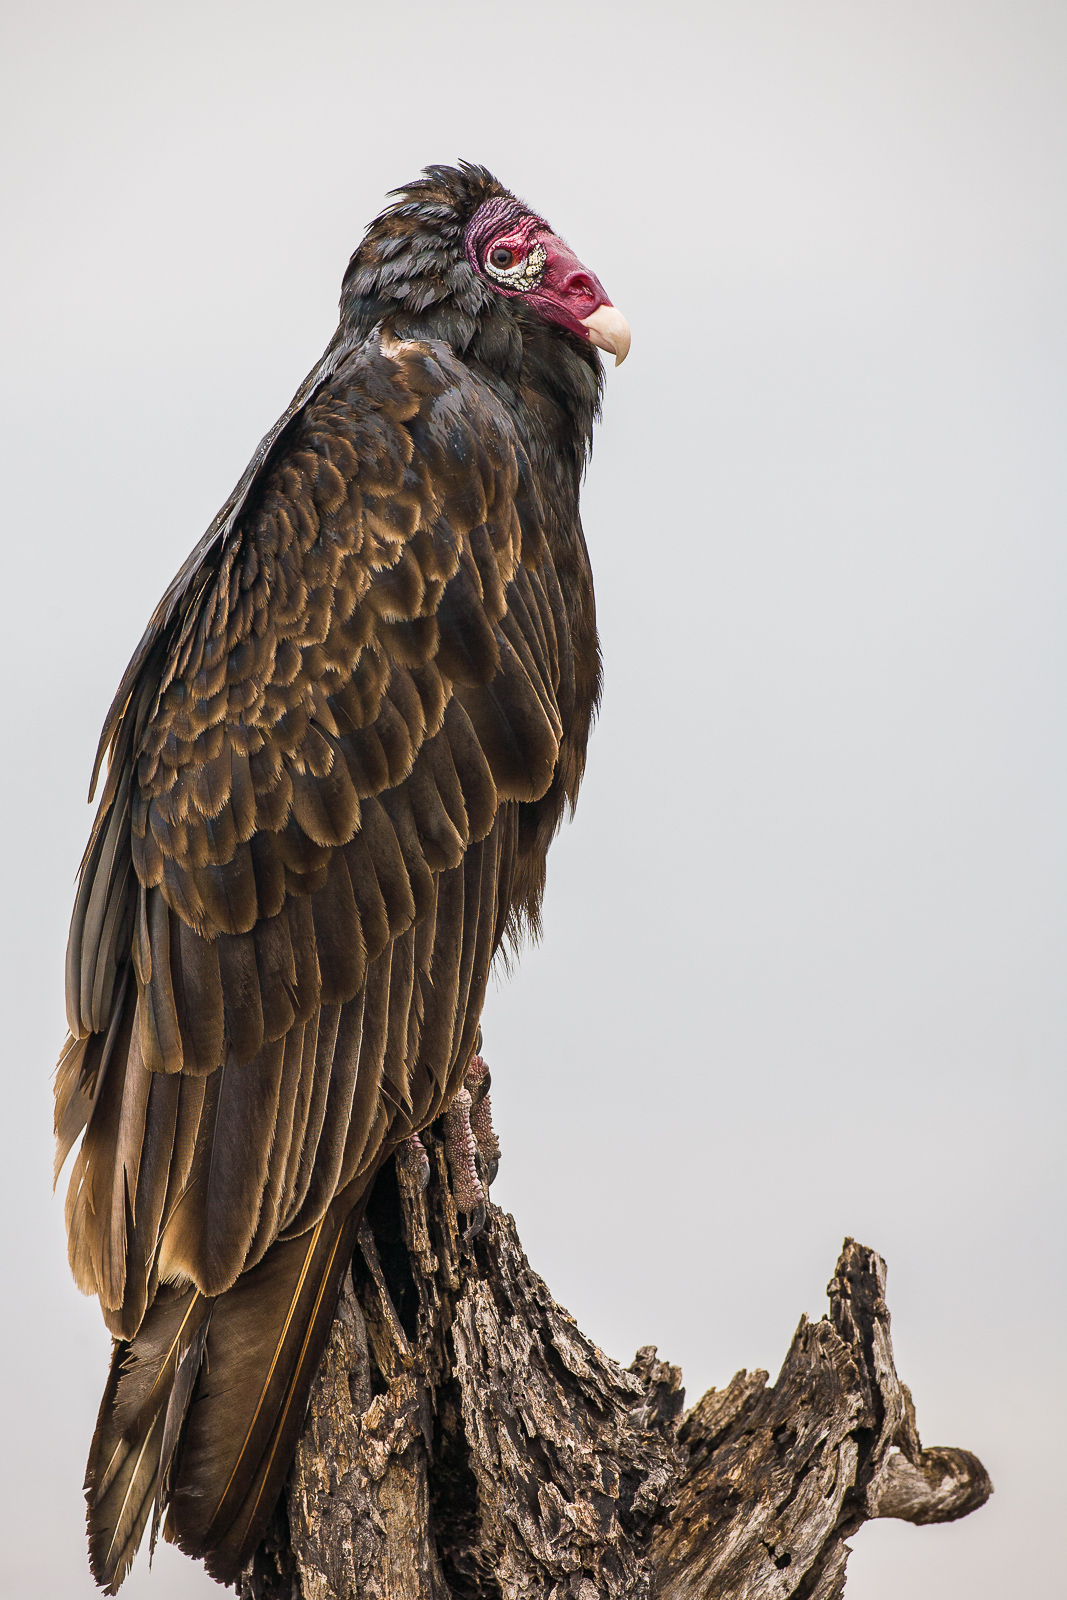 Perching on deadwood along the waterfront during a rainy day this Turkey Vulture waits to dry its wings.